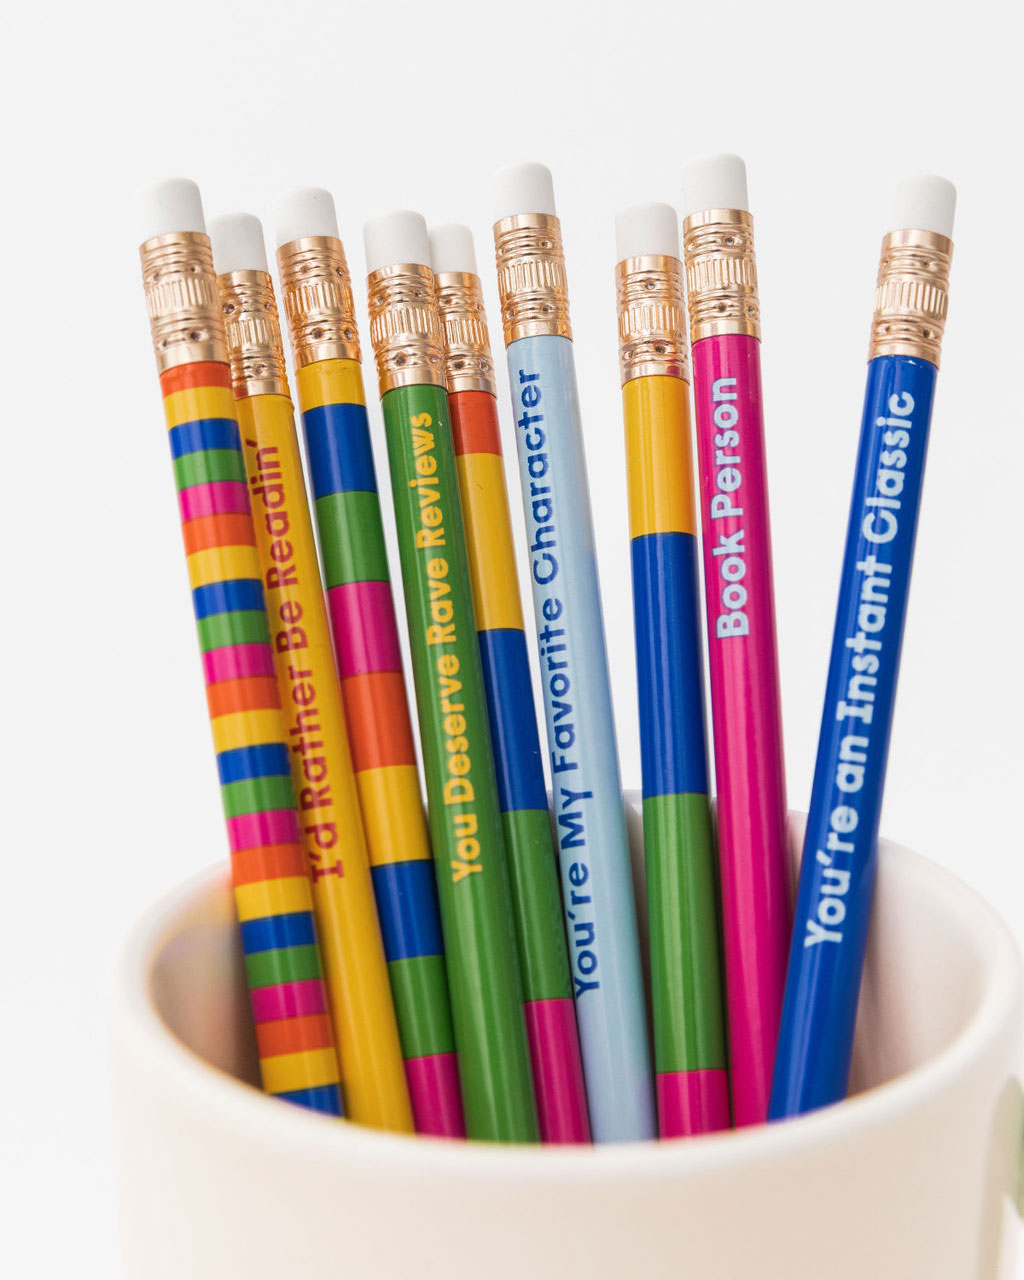 ban.do - Write On! Pen Set: How are You Feeling?